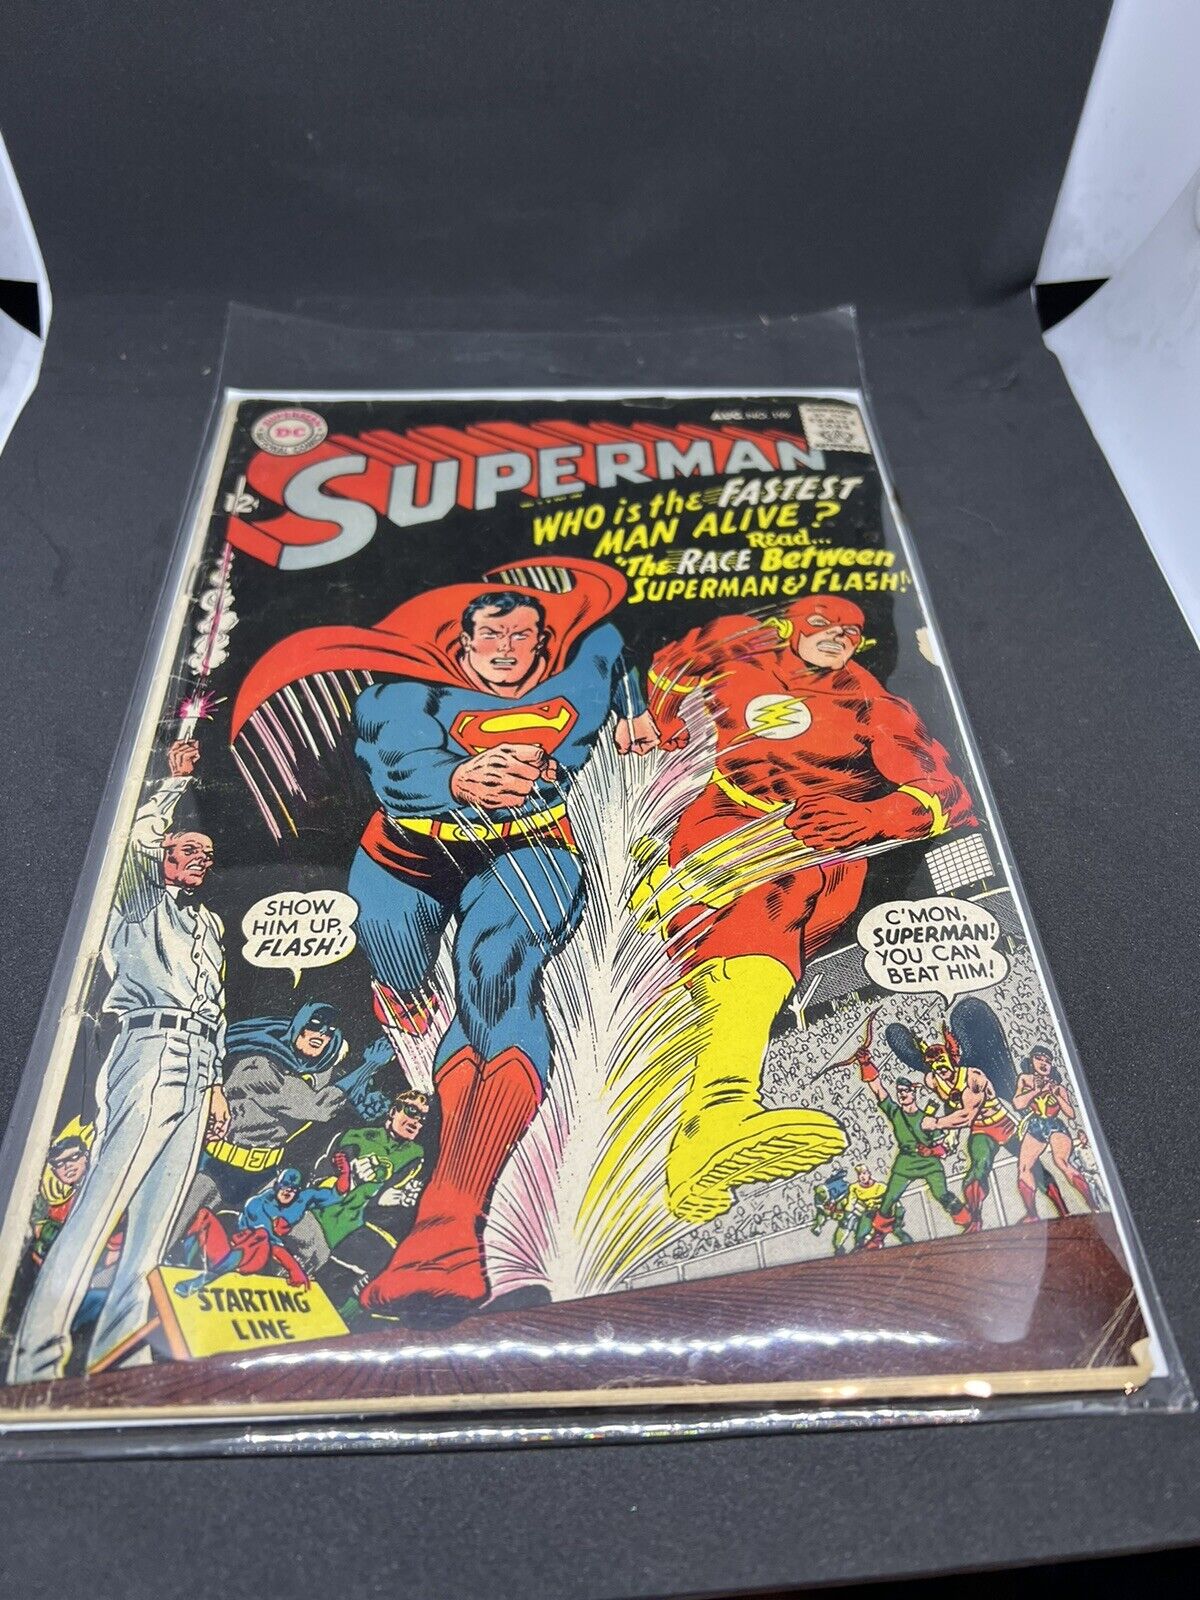 Superman #199 Race Between Superman and Flash DC Comics 1967- Collectable